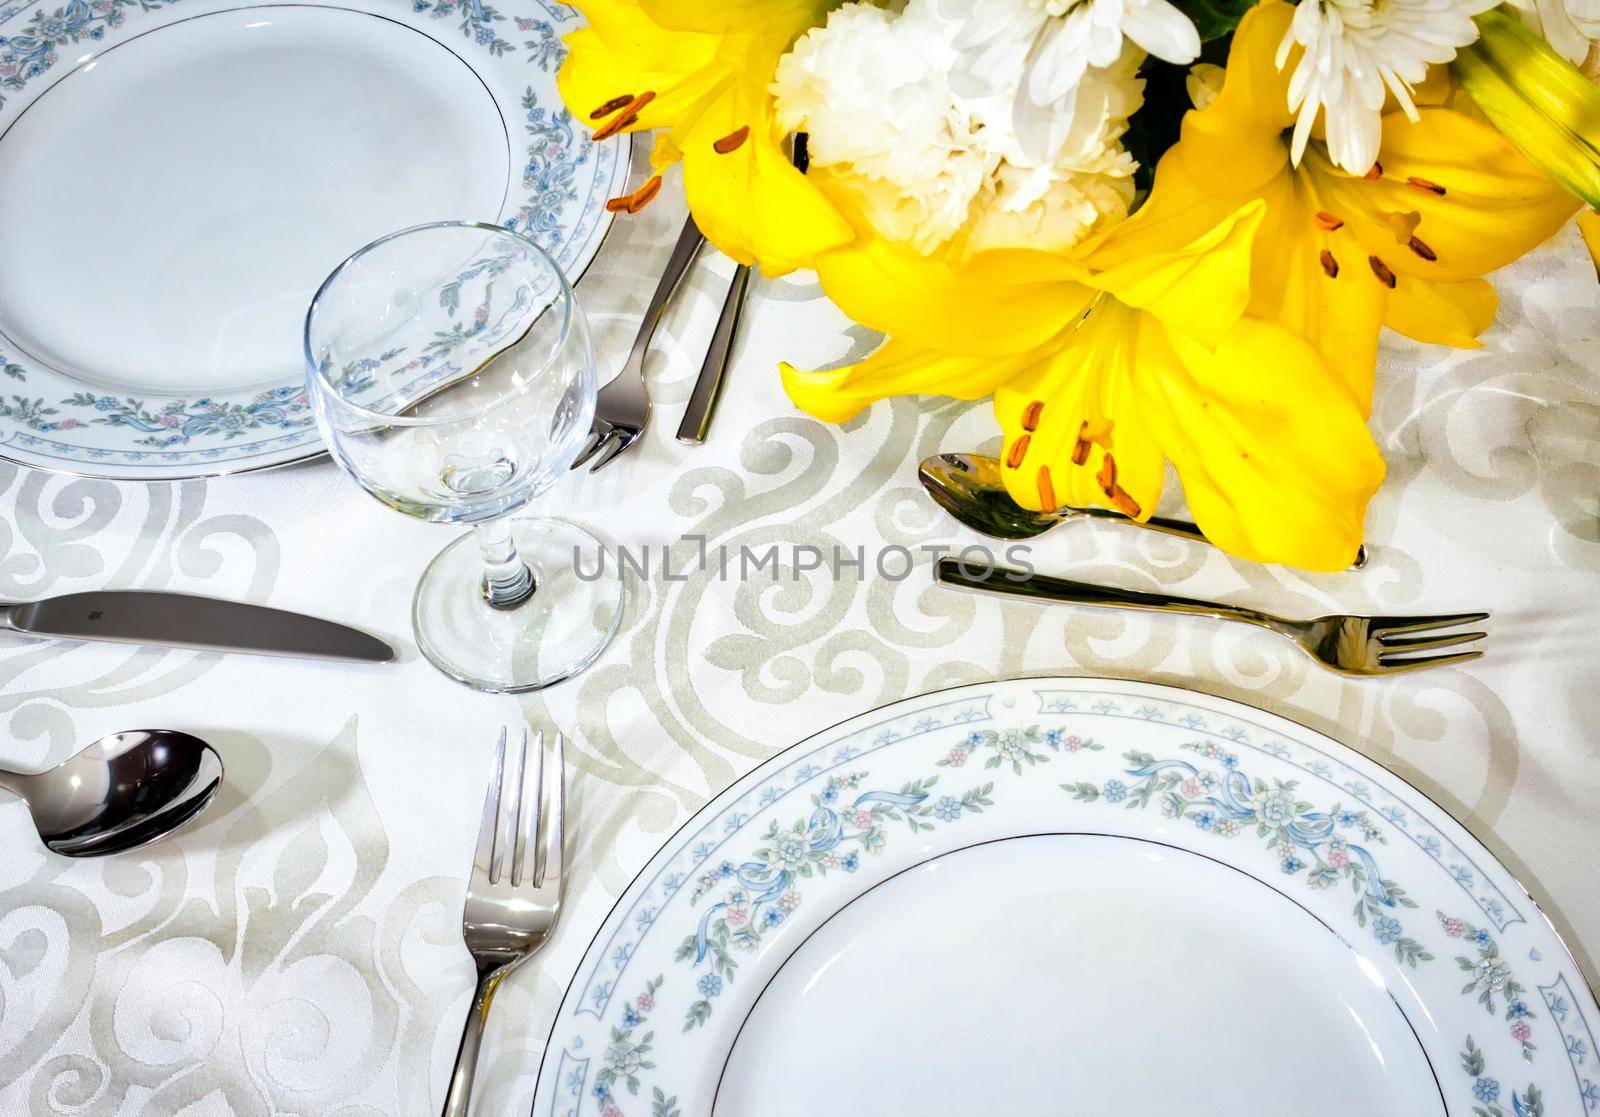 Elegant dining set for a romantic meal on a white tablecloth in a fancy restaurant with arranged flowers in a vase on the table